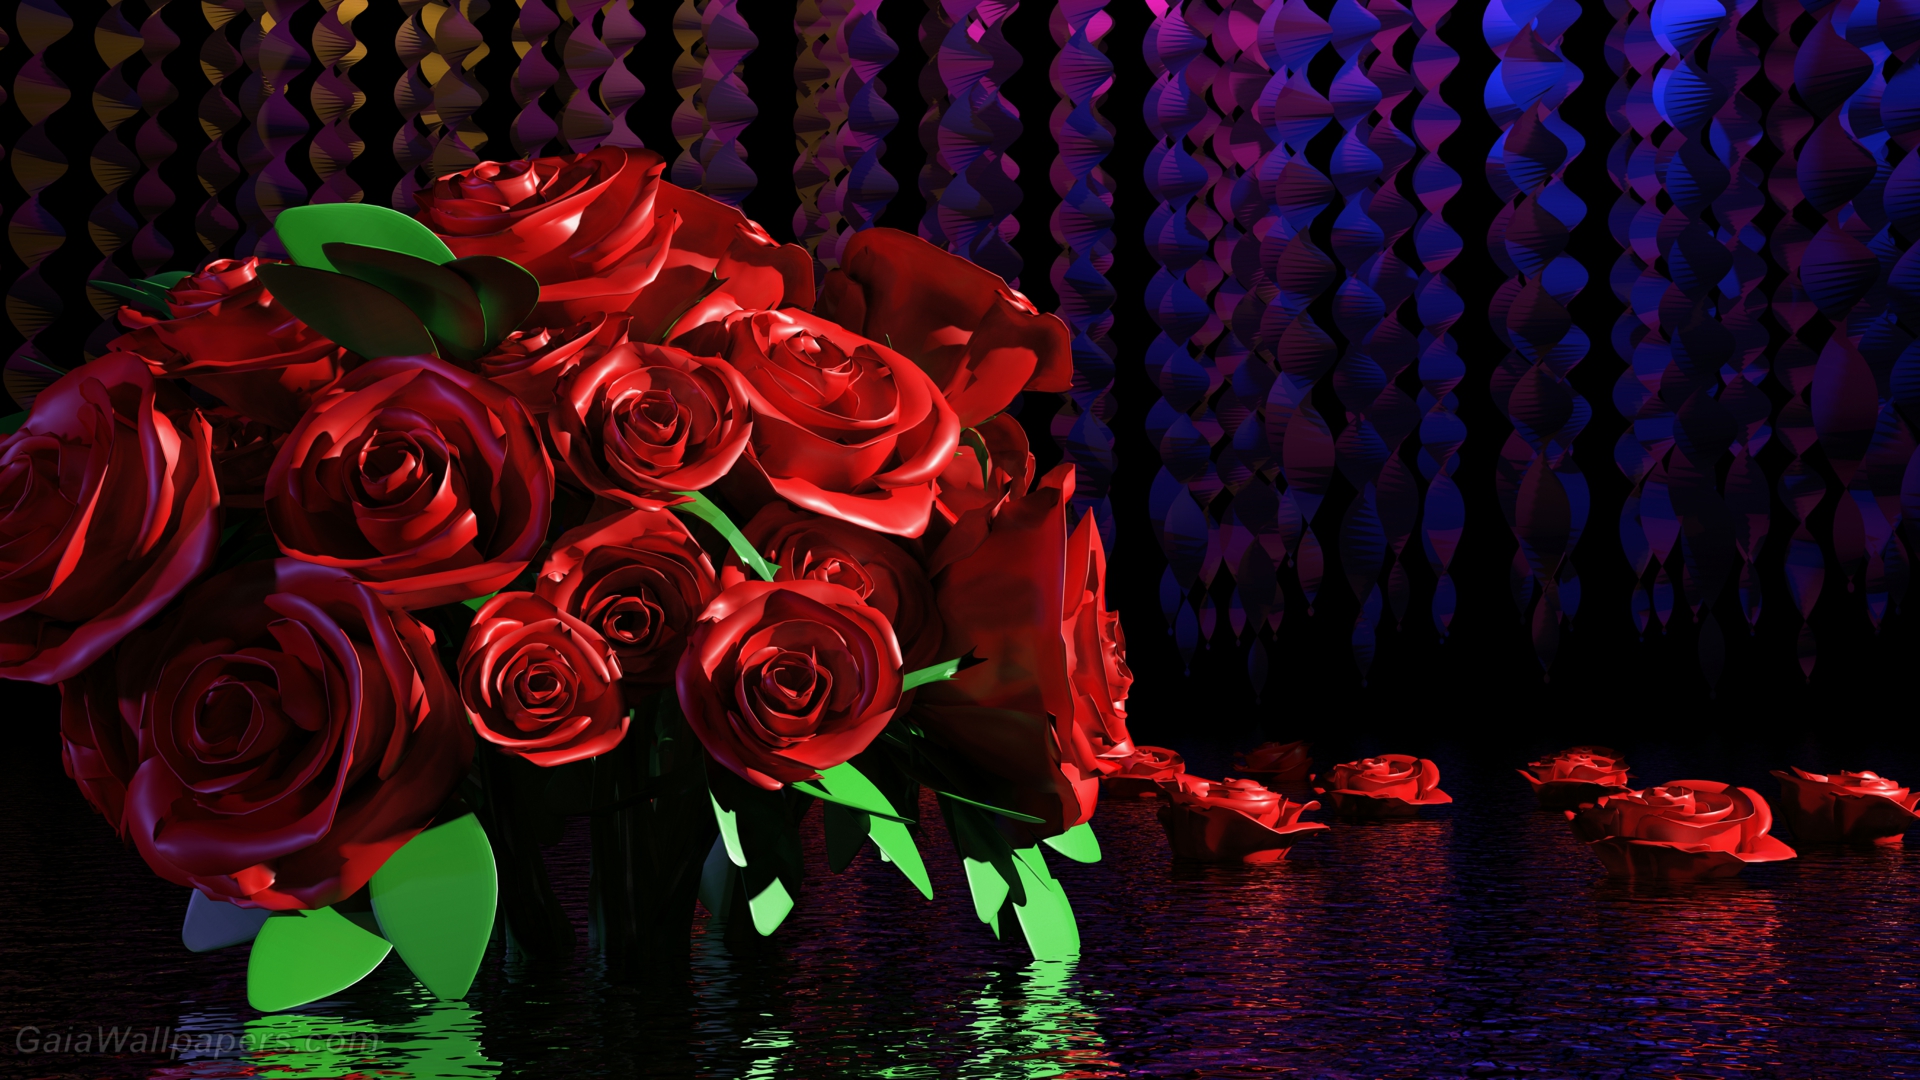 Peaceful roses in the calm energy space - Free desktop wallpapers